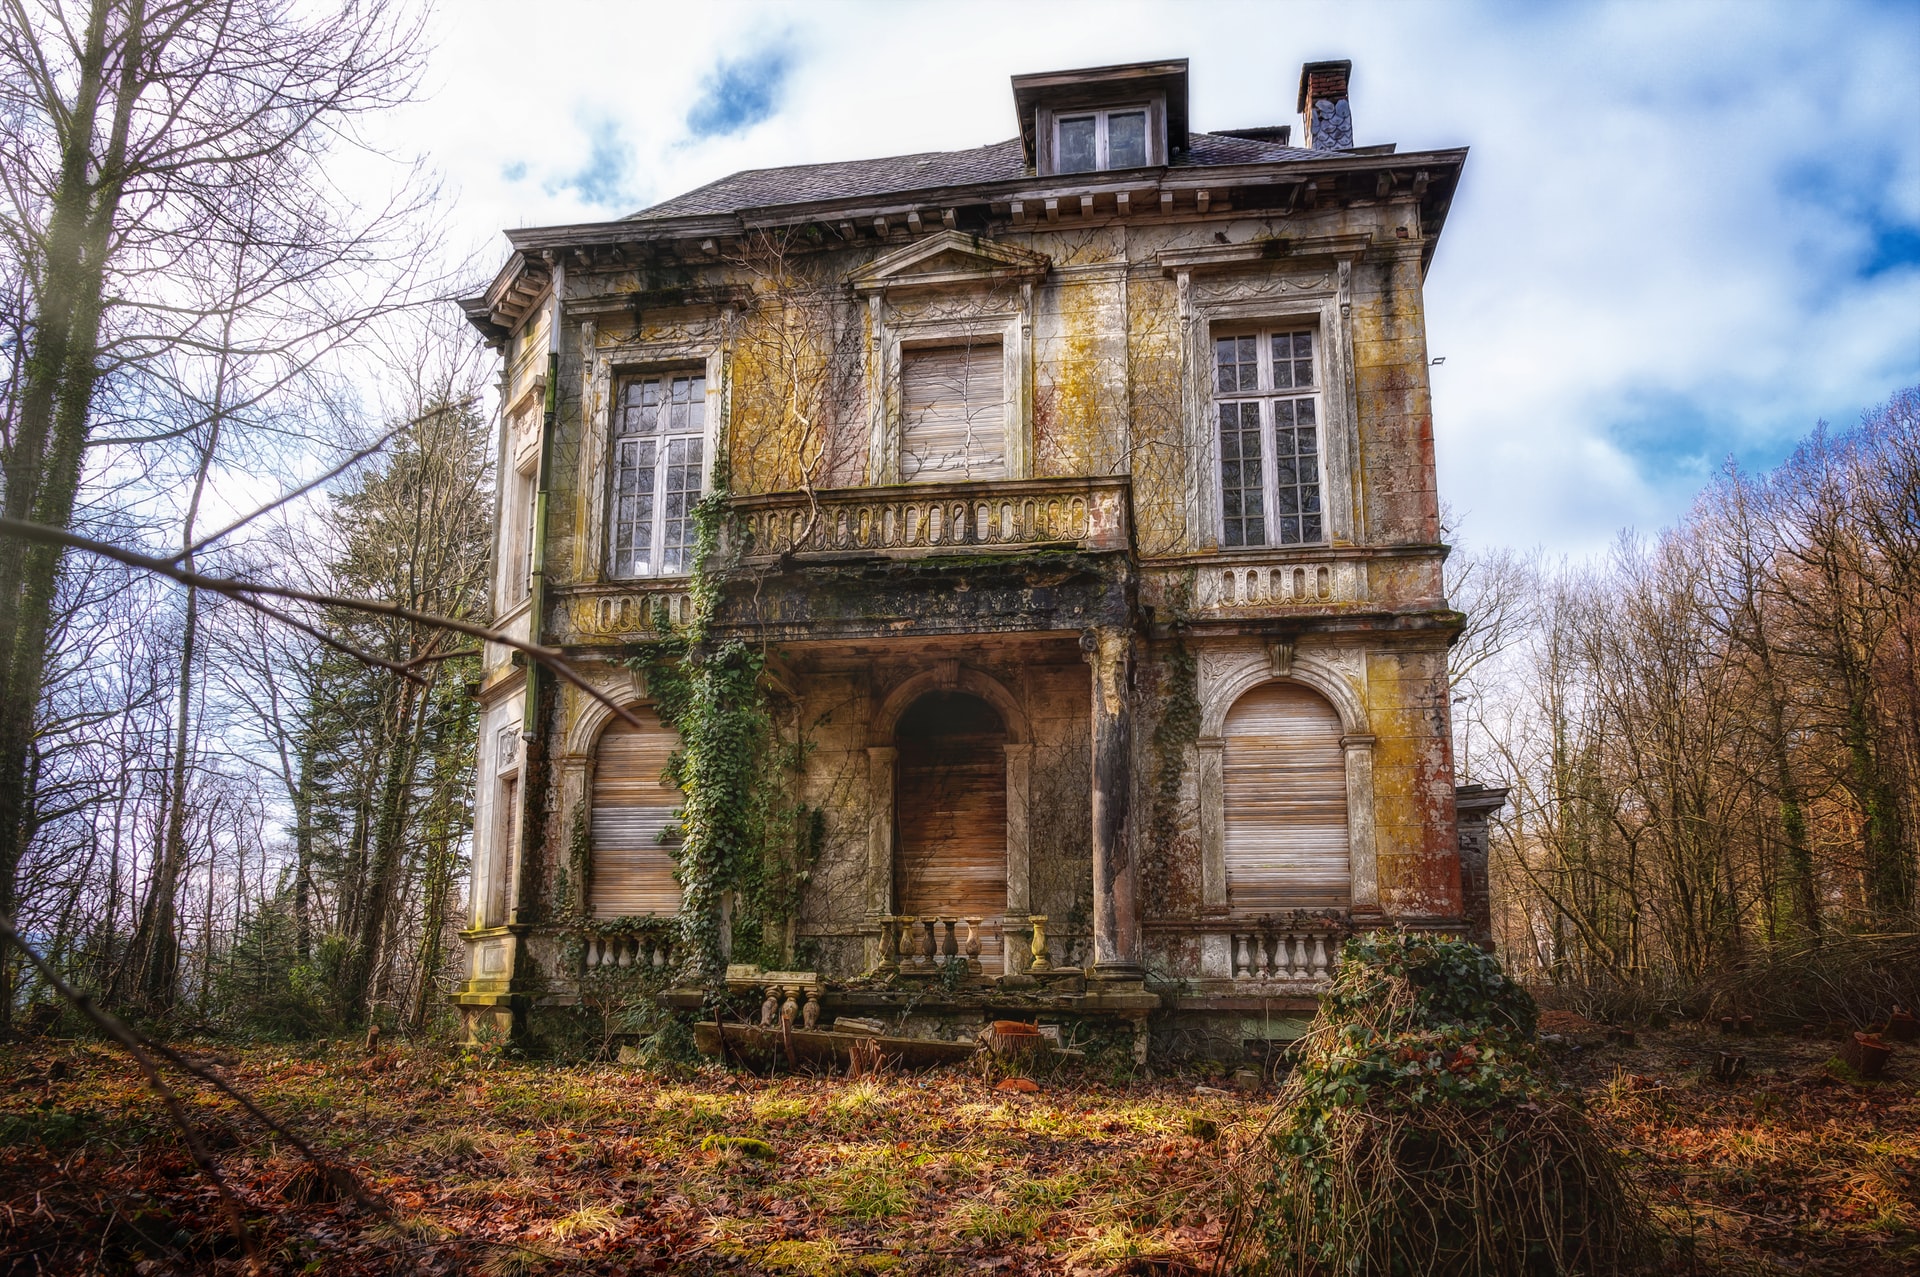 How do you restore your home's exterior to its former glory?